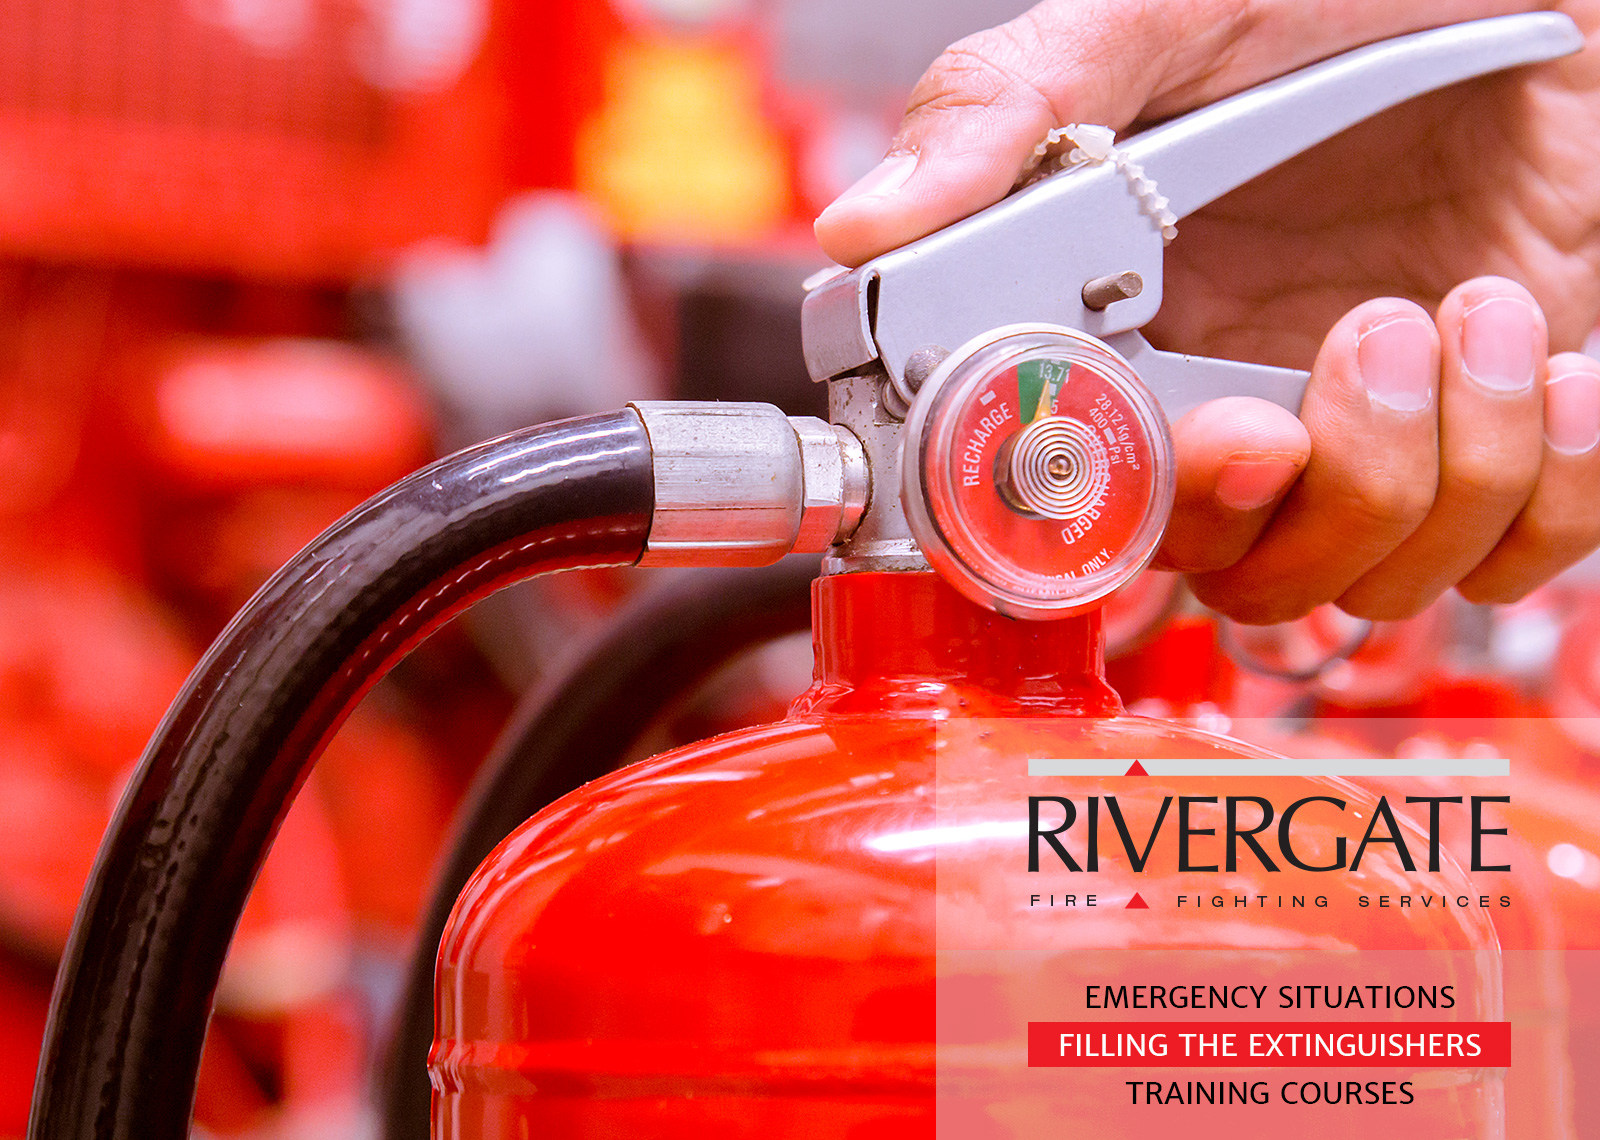 Filling the extinguishers